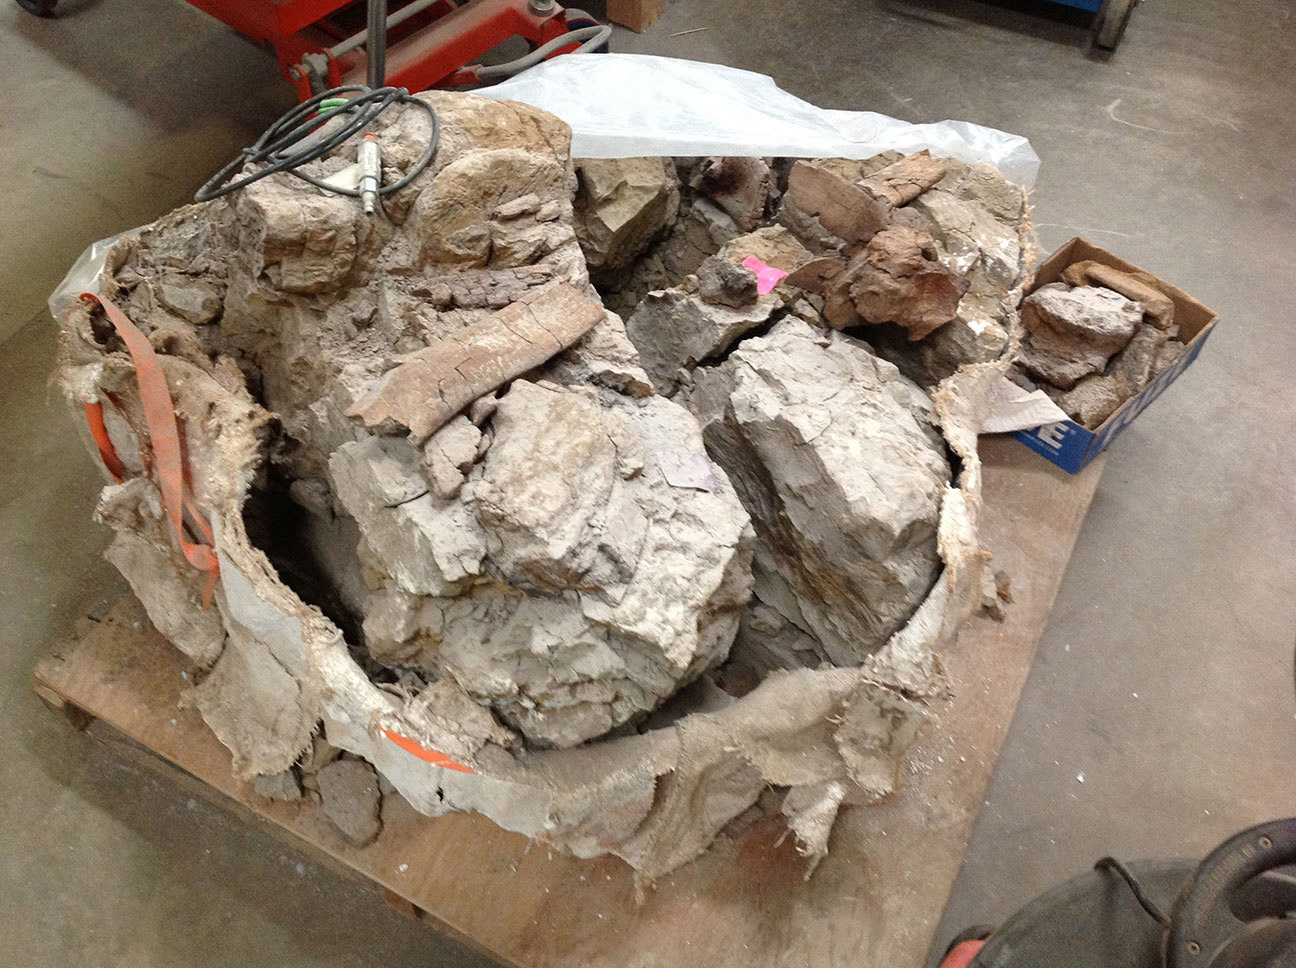 The rib cage of a Triceratops was excavated and wrapped in this jacket of cloth and Plaster of Paris. In the paleontology lab, the jacket is carefully removed. A rib is exposed along the top of the pile of bones and rock.